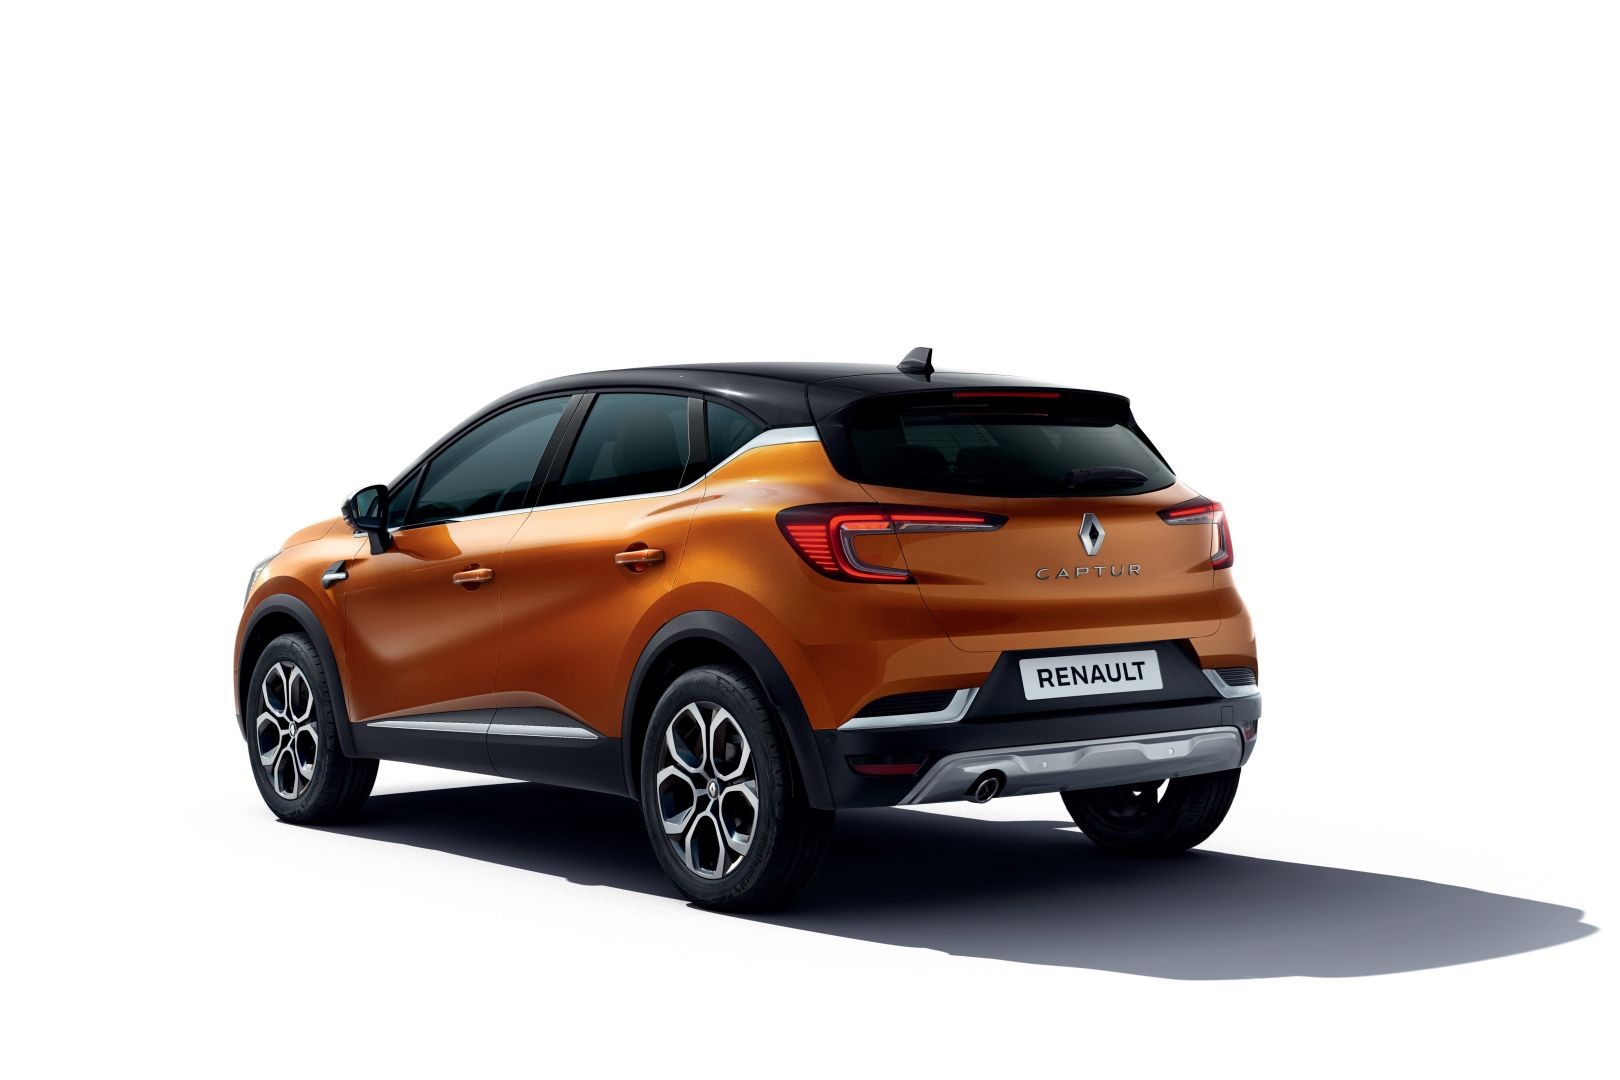 New Renault Captur Engine Specs, Features and Dimensions